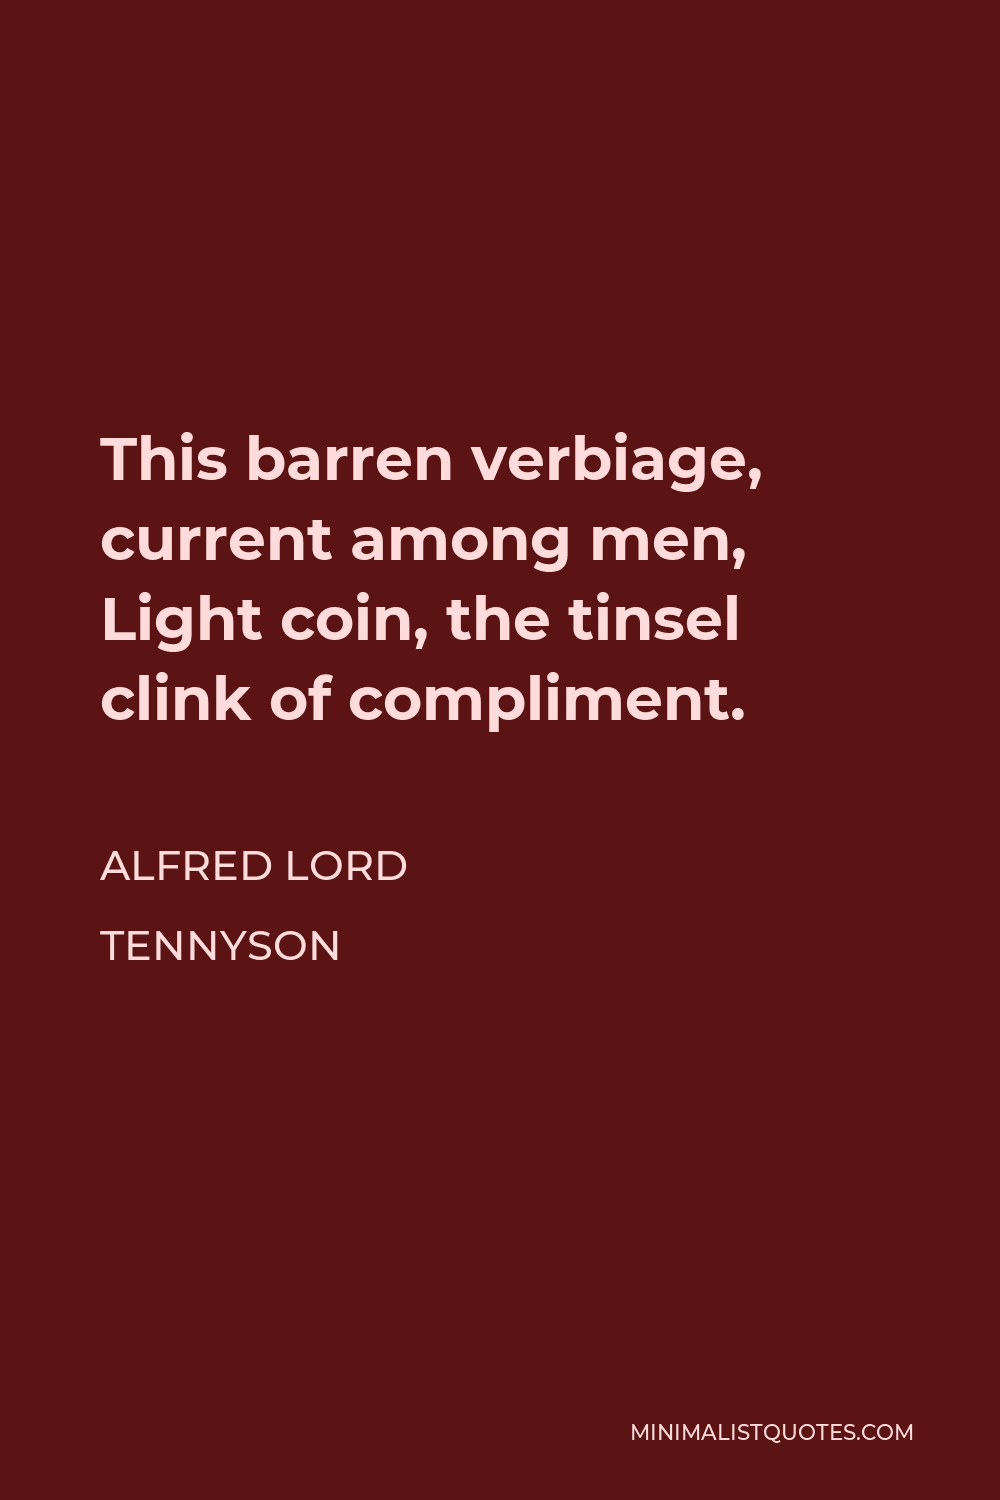 Alfred Lord Tennyson Quote - This barren verbiage, current among men, Light coin, the tinsel clink of compliment.